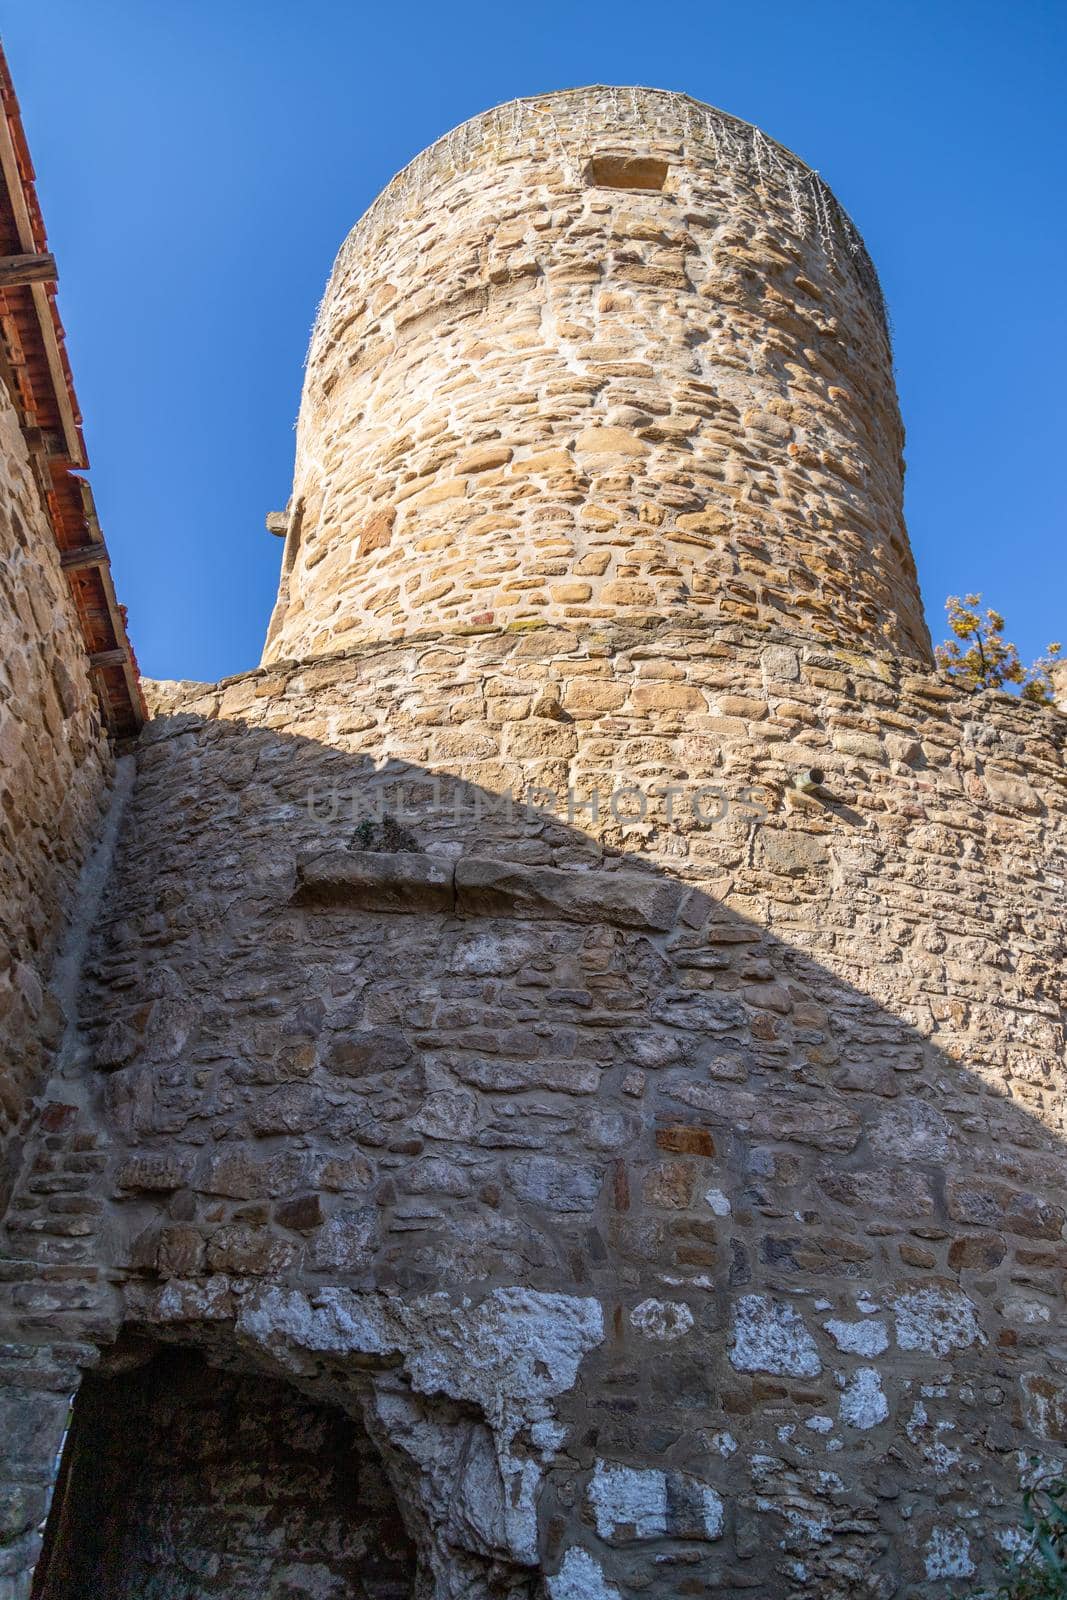 Historic city wall and tower Buergerturm in Meisenheim, Germany